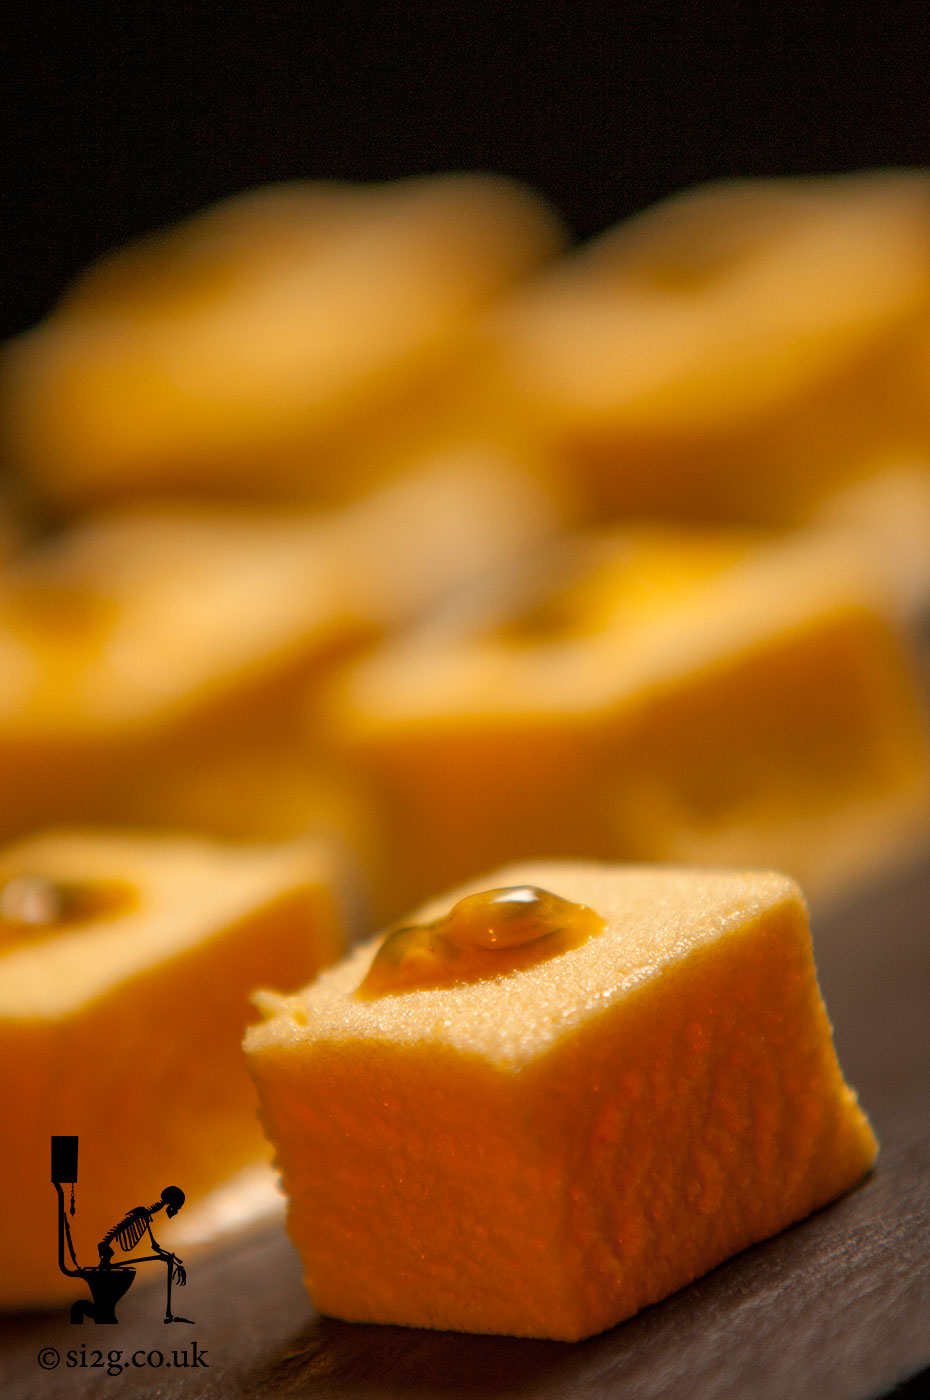 Passion Fruit Sponge Cake - Neatly-cut sponge squares, fresh from the oven and served on a slab of slate.